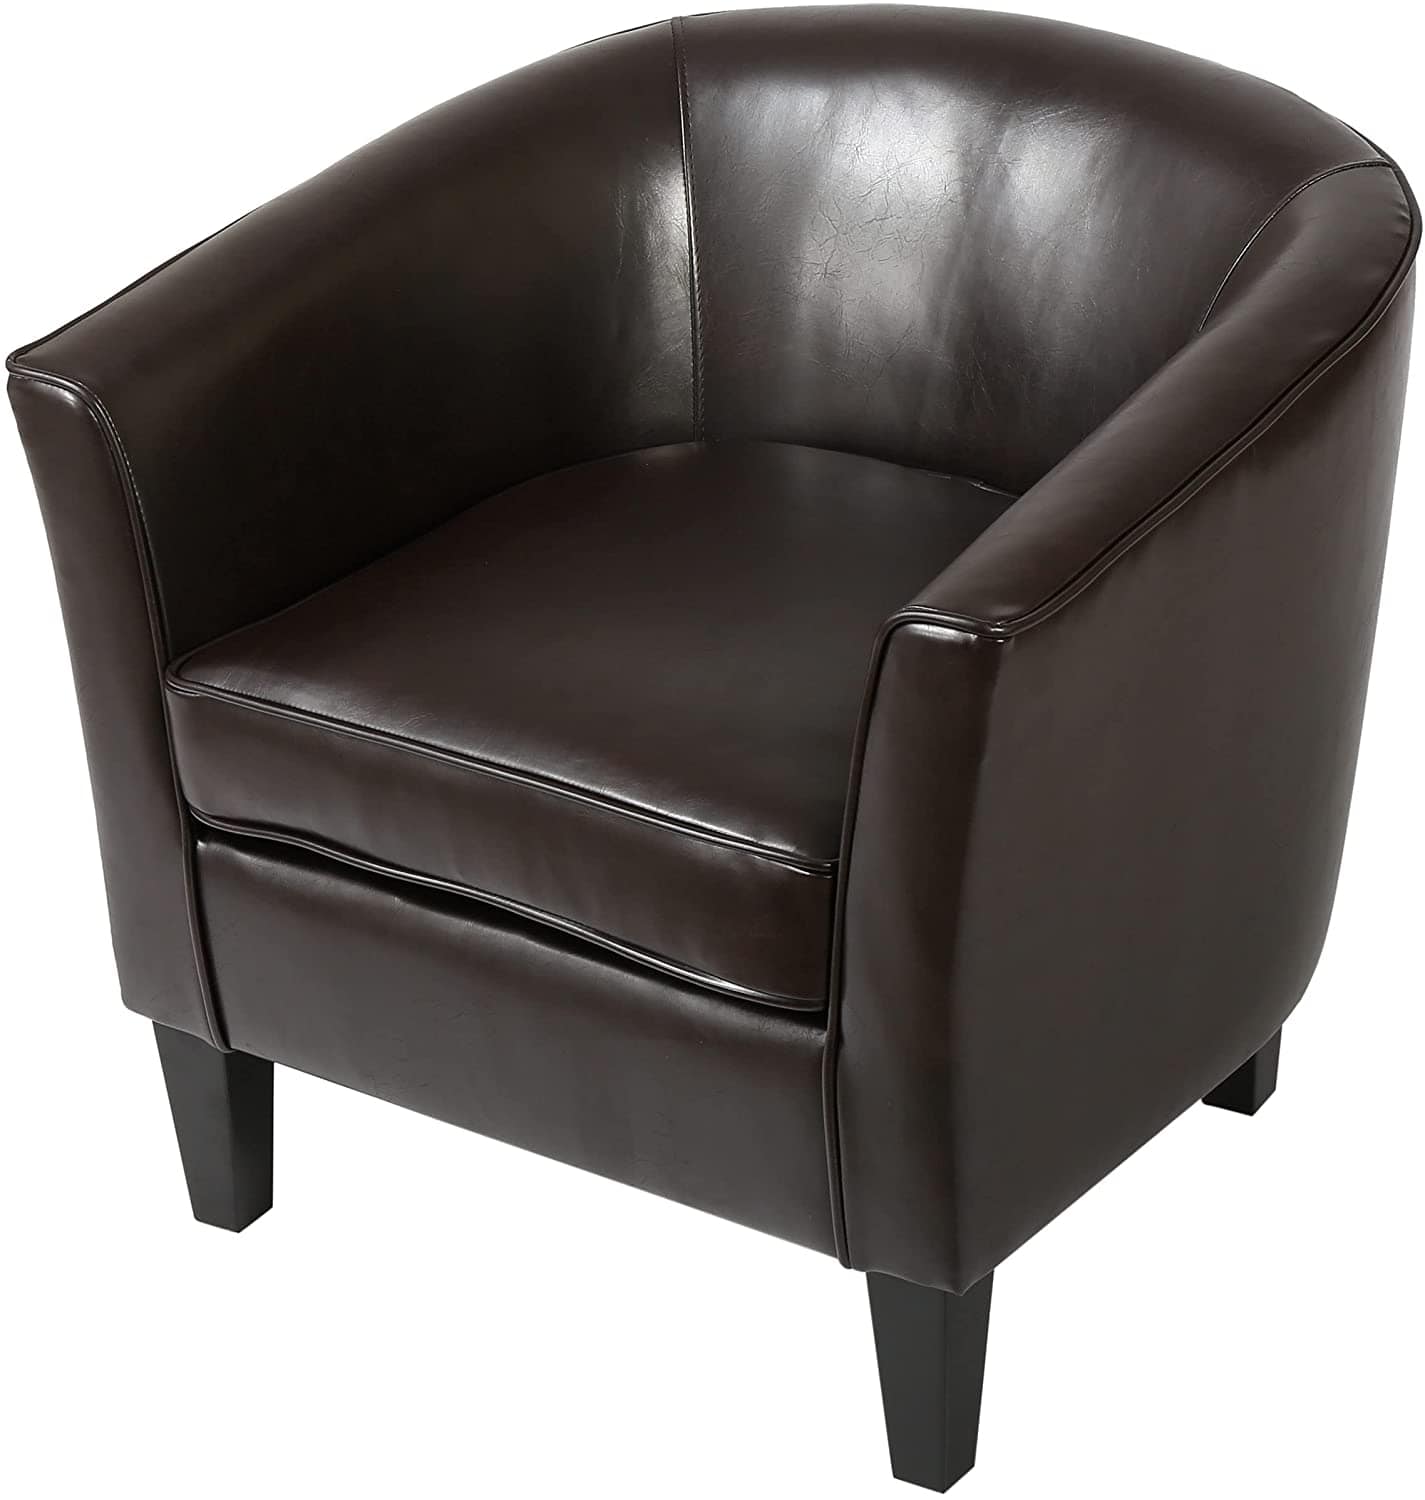 Logan Upholstered Club Chair with Arm Rest , Brown